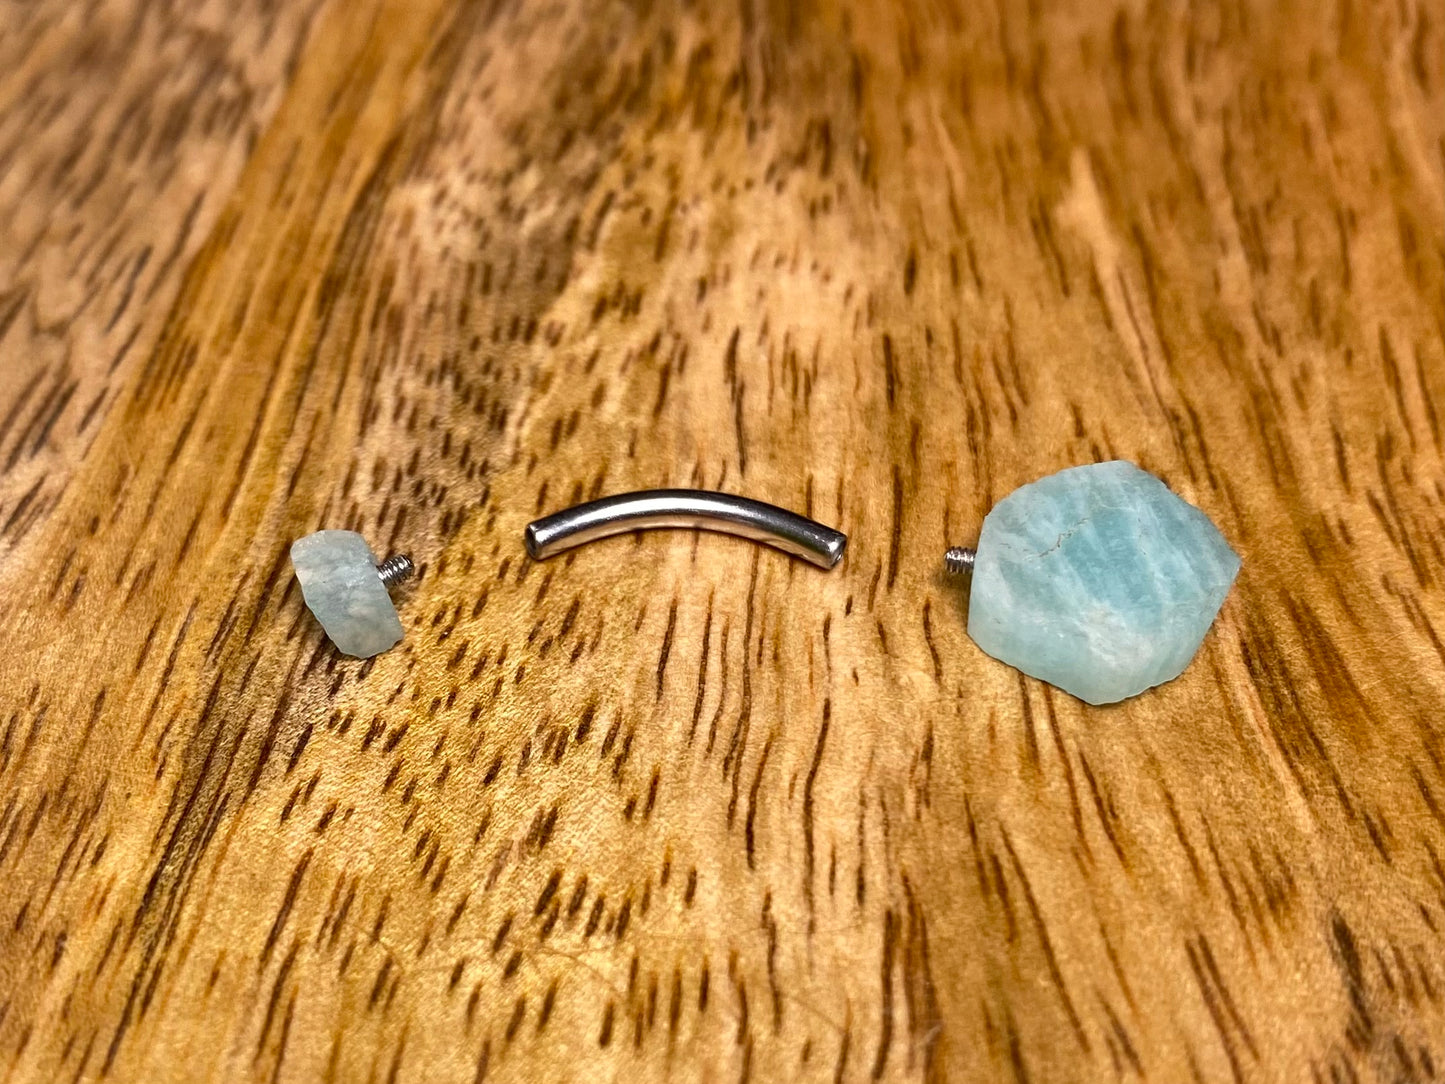 Amazonite Belly Bar 1.6mm, Blue Amazonite Navel Bar 14g, 12mm Internally Threaded Curved Surgical Steel Bar, 4mm + 10mm Raw Natural Crystal